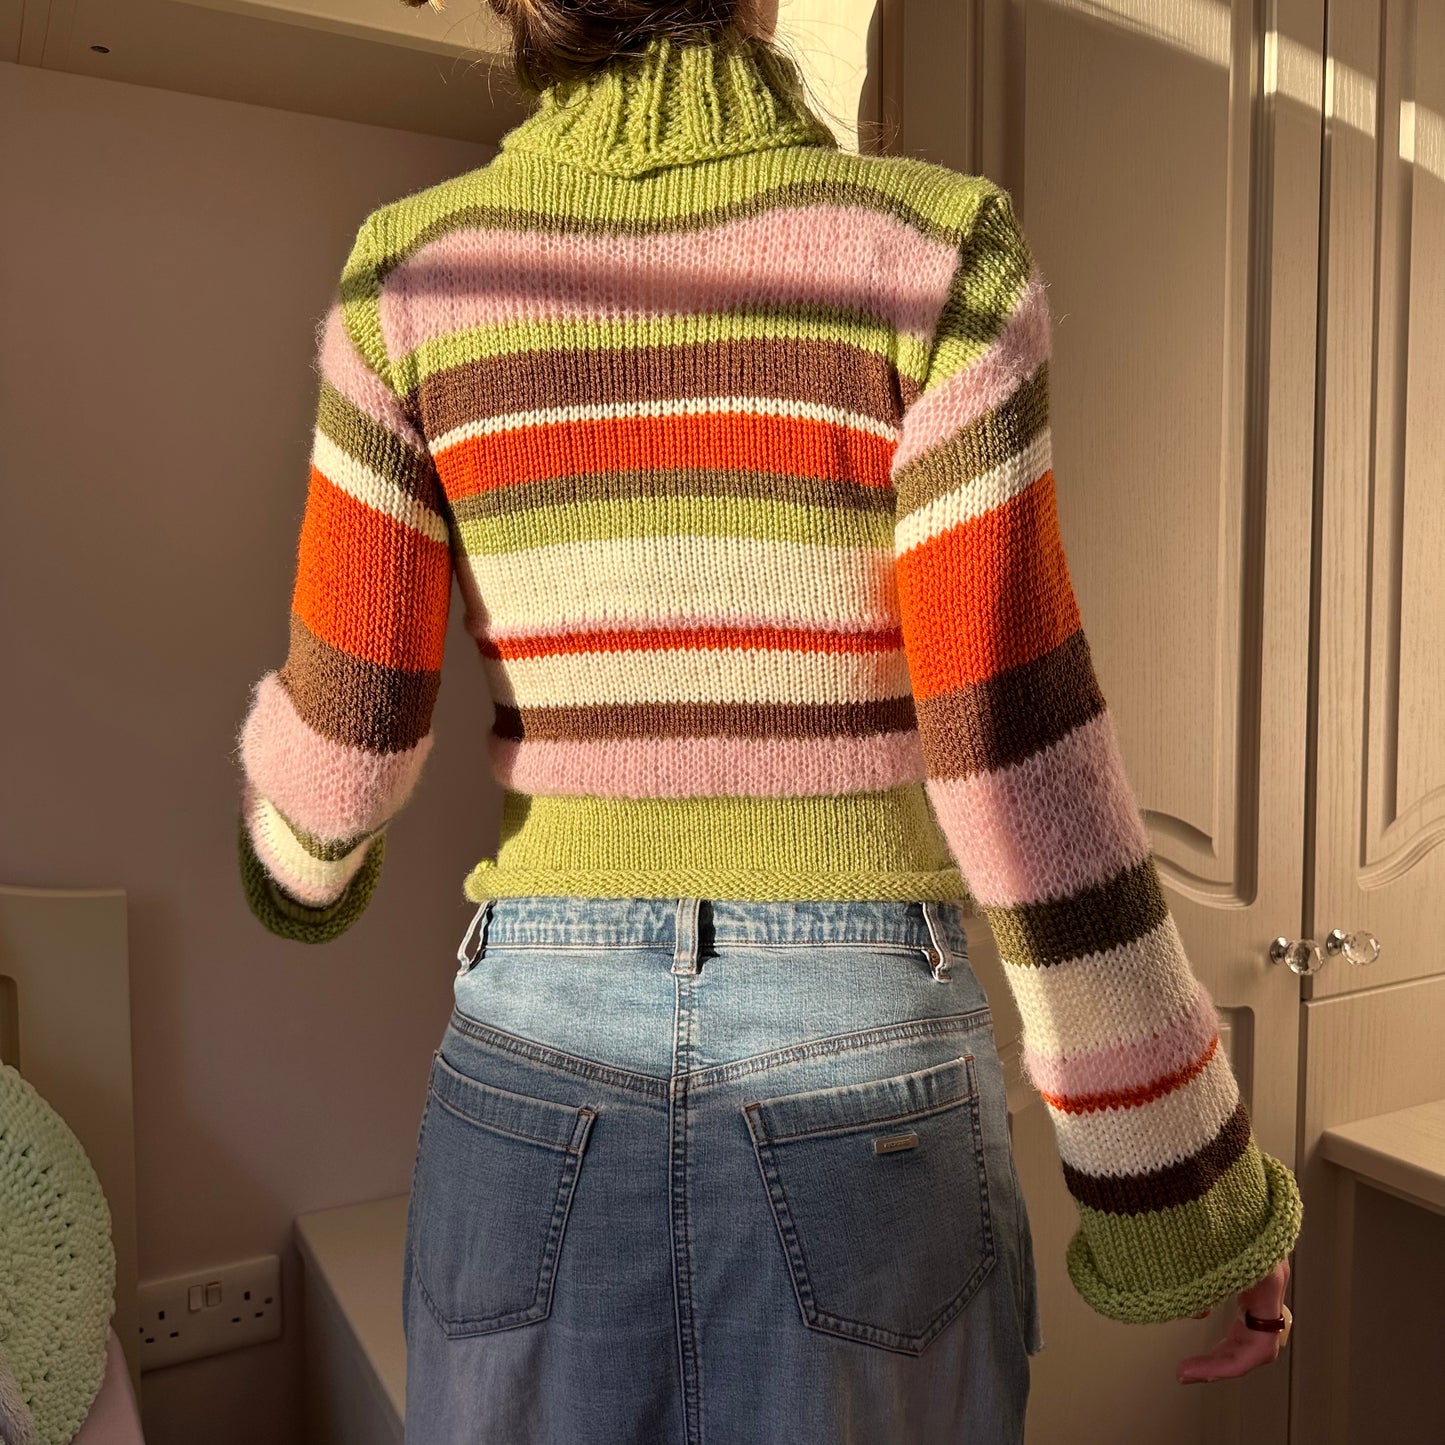 The Lola Jumper - striped roll neck knitted jumper